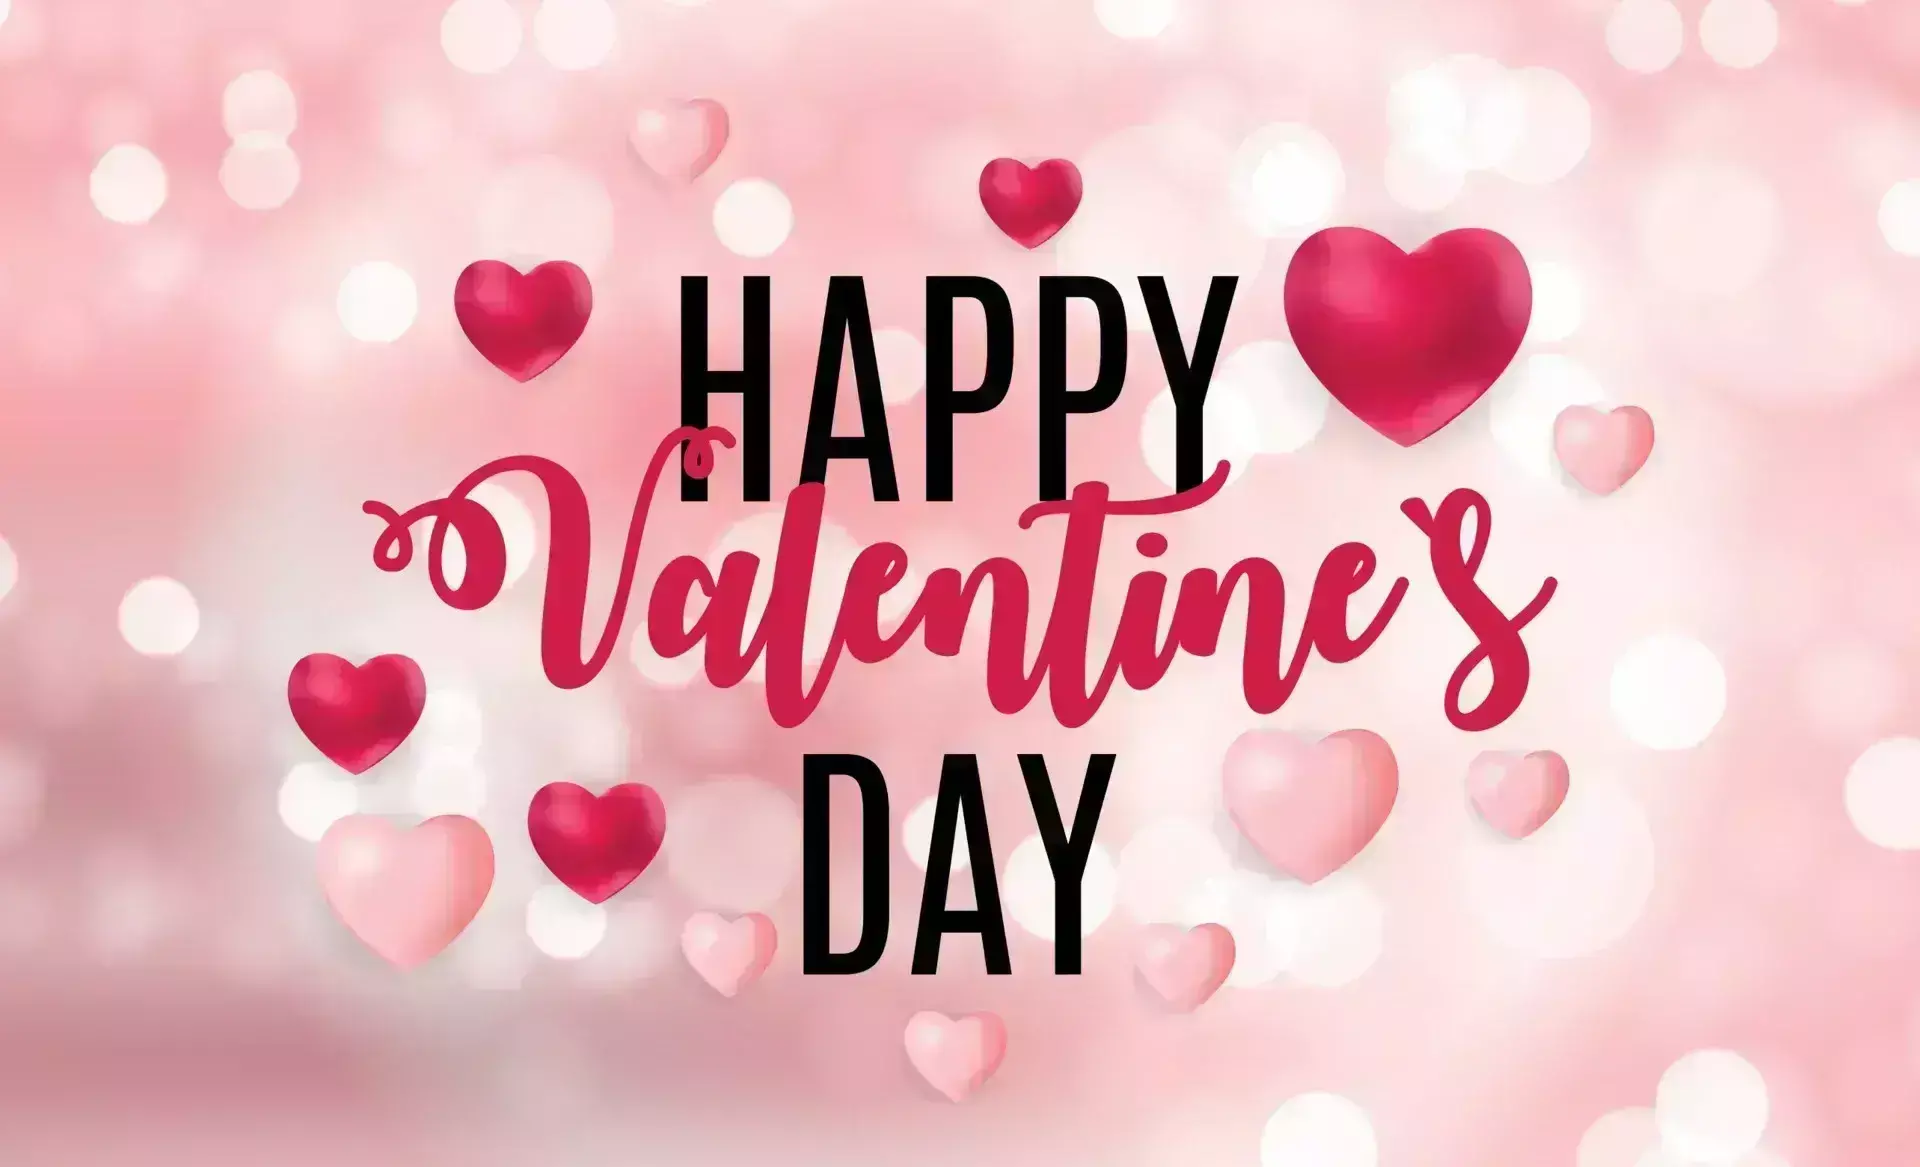 Happy Valentines Day 2023: Wishes, Quotes, Images, Whatsapp Messages, Images, Status, Greetings, GIFs.